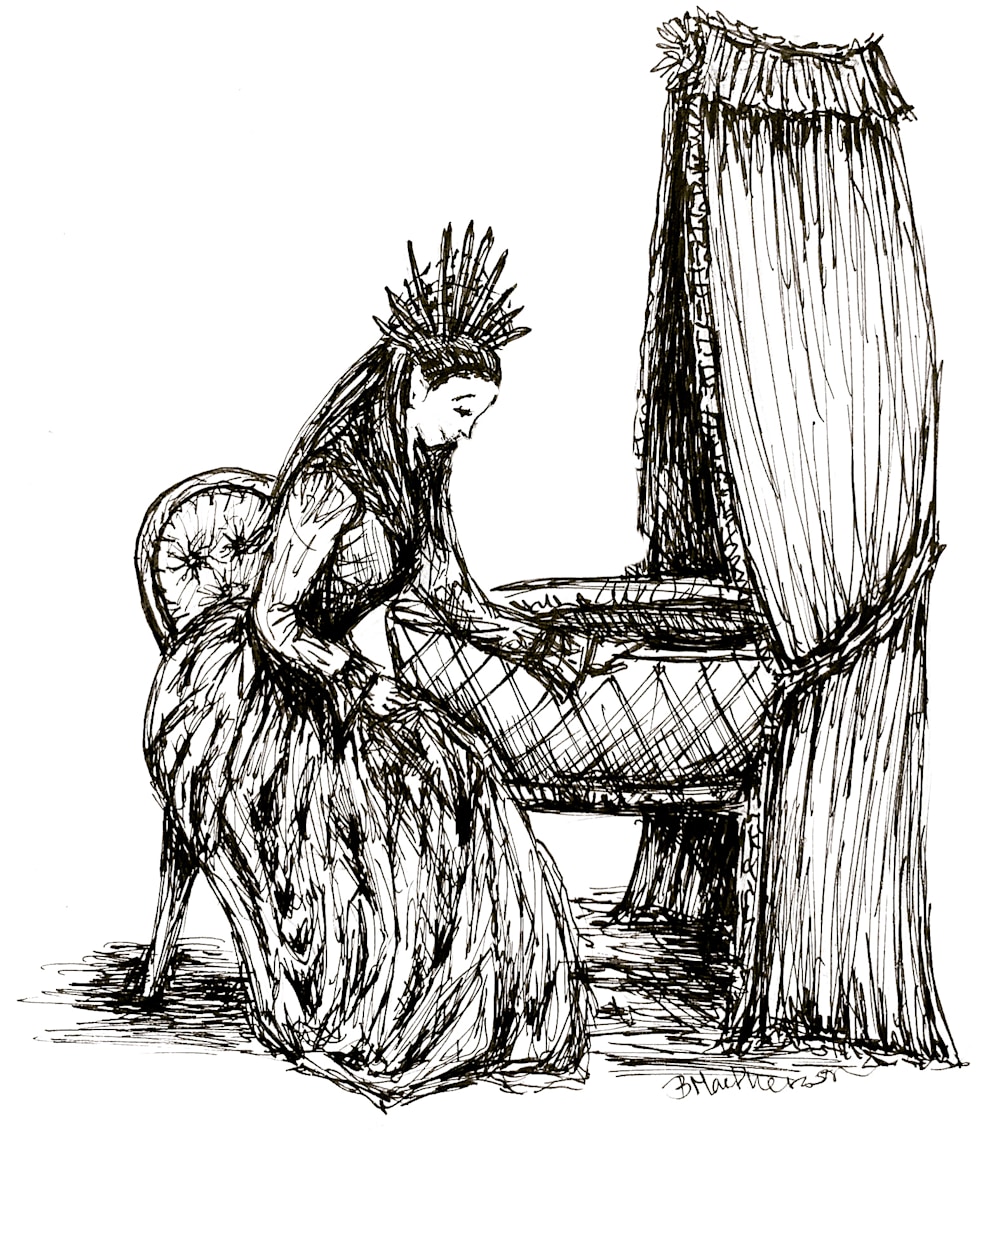 Elven Queen looks into an ornate Victorian style crib at a changeling baby.